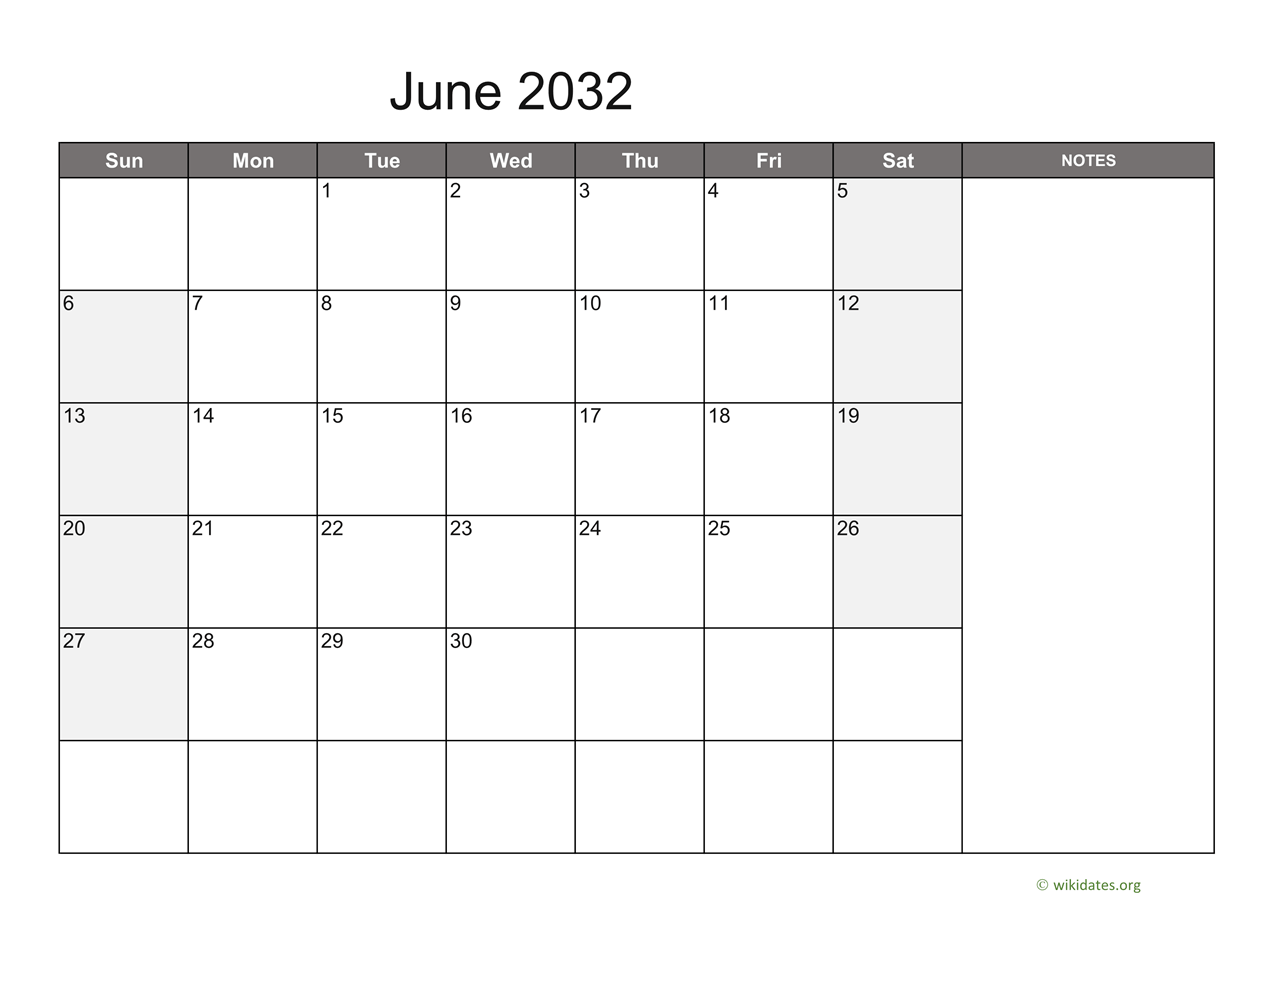 June 2032 Calendar with Notes WikiDates org